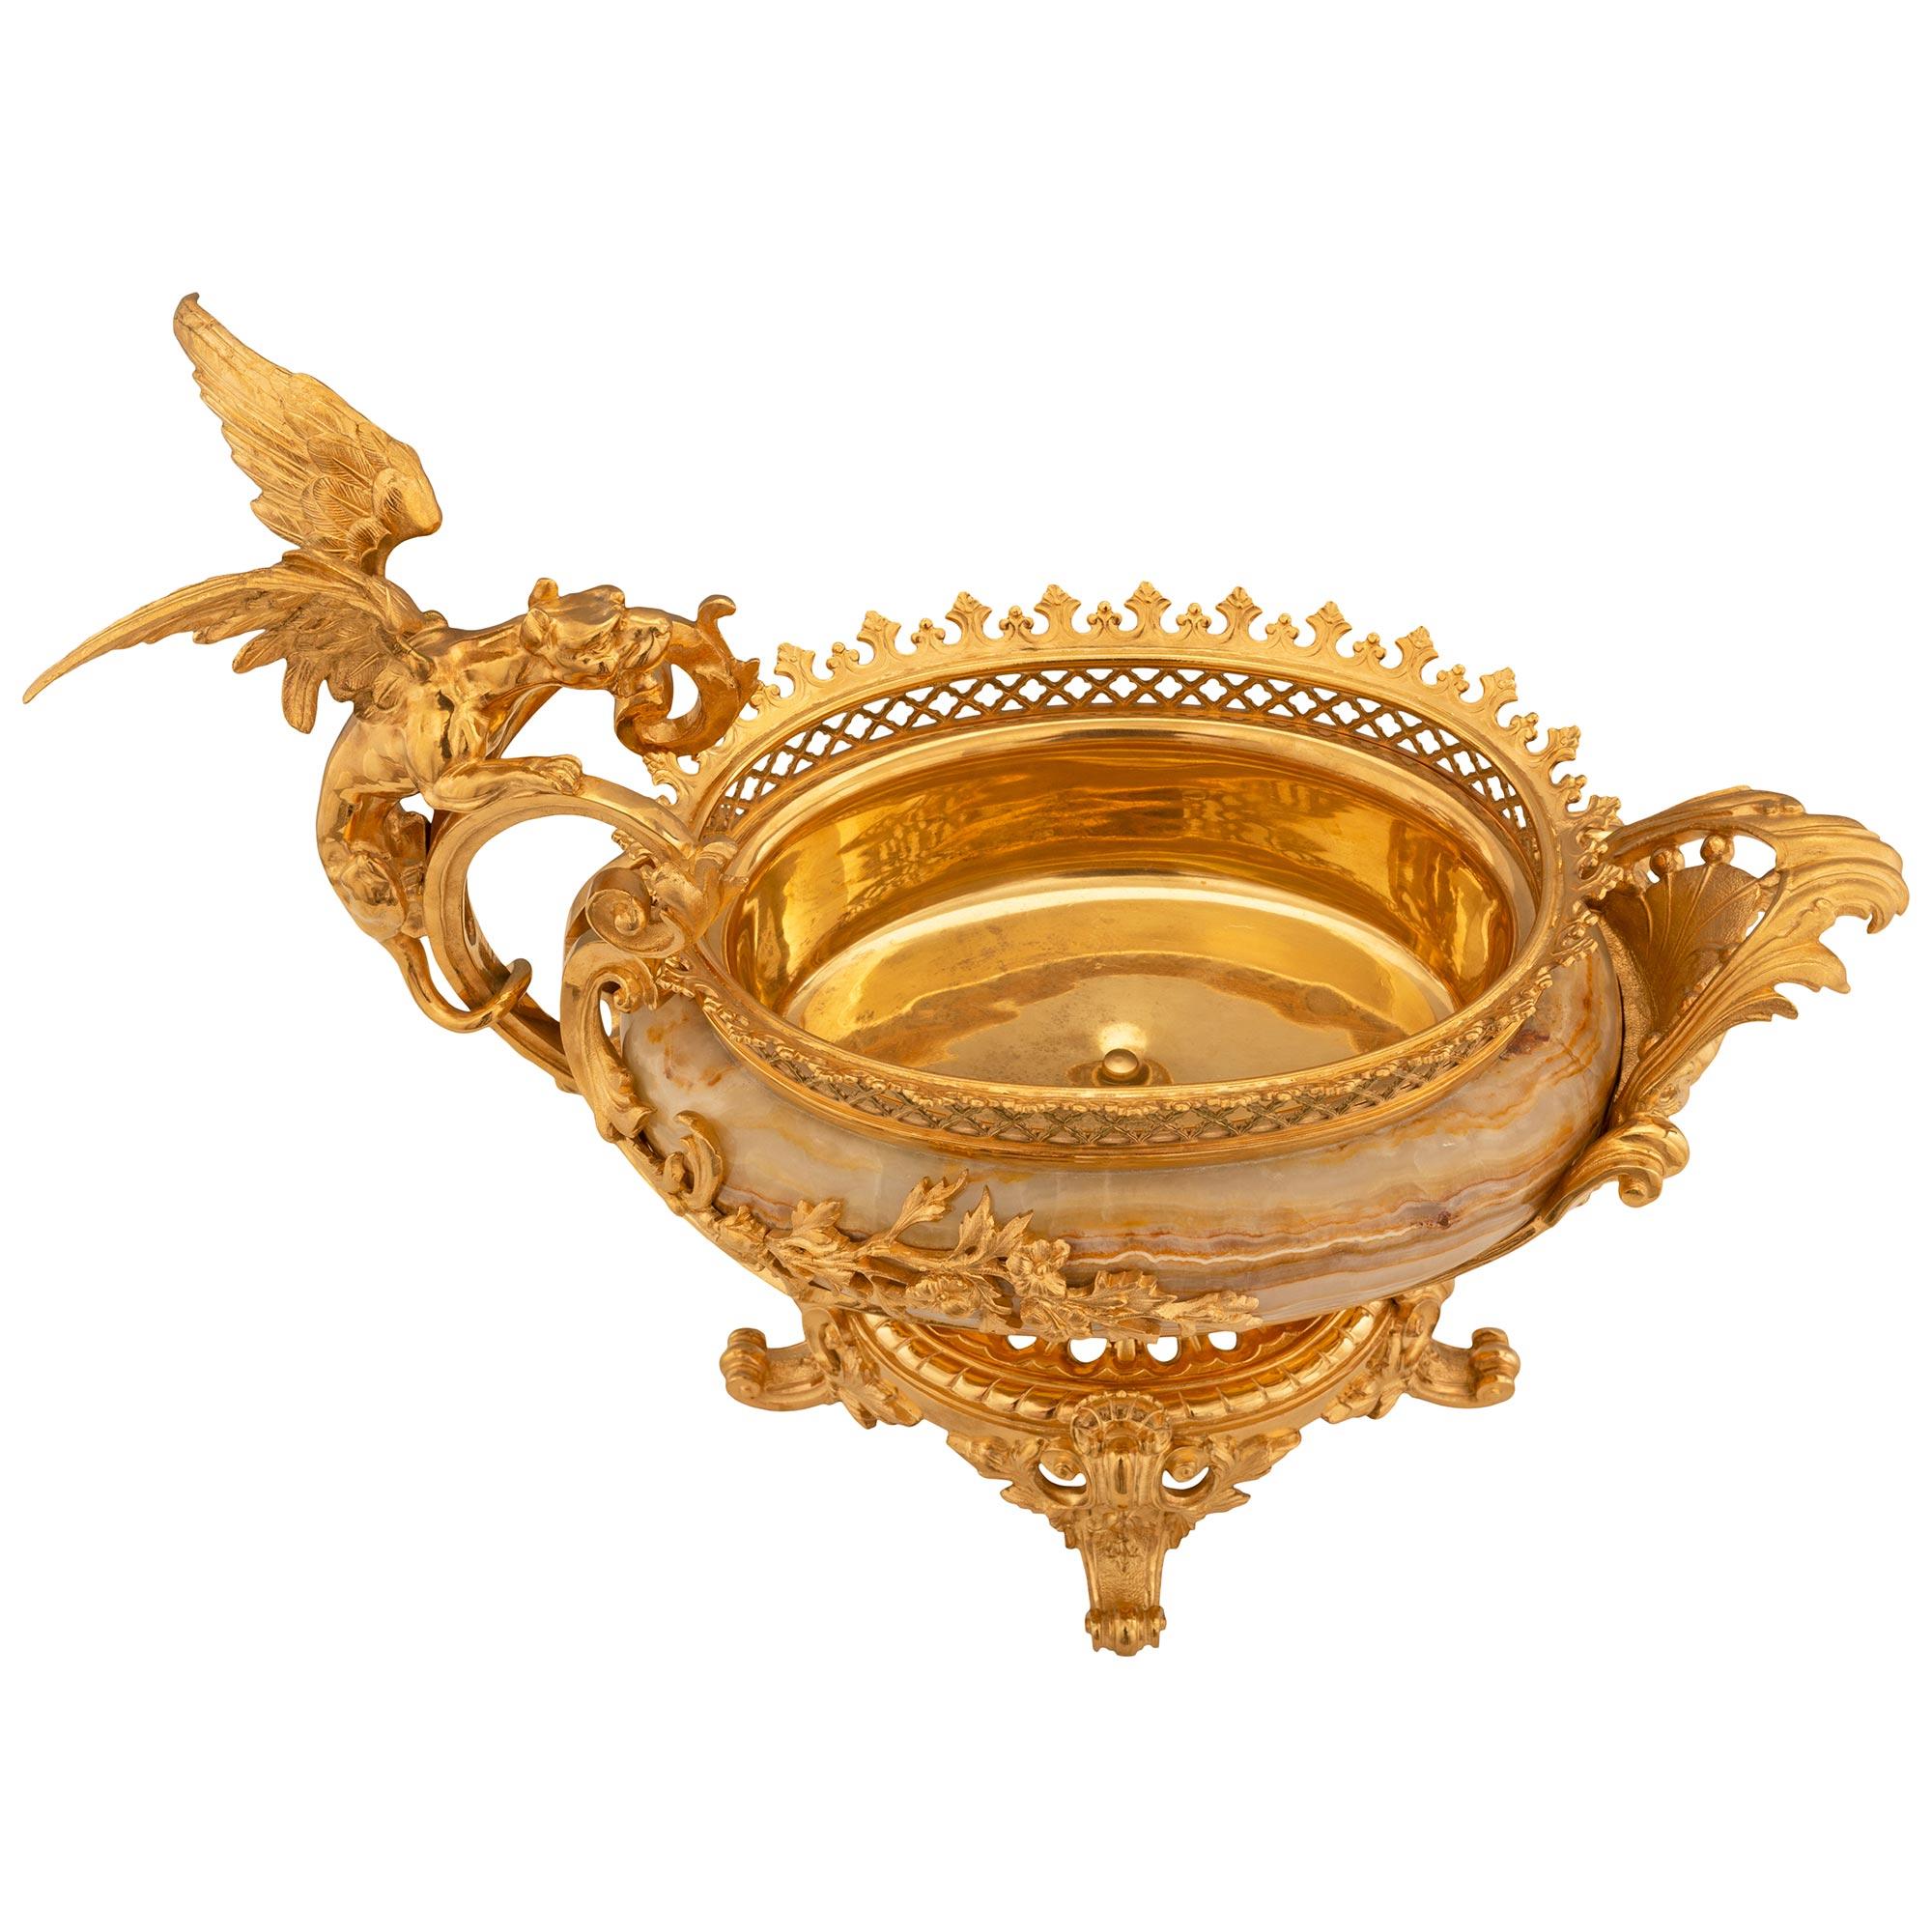 A stunning and most decorative French 19th century Renaissance st. Alabastro marble and ormolu centerpiece/planter. The oblong centerpiece is raised by striking pierced scrolled foliate feet with seashells below the base with a reeded wrap around